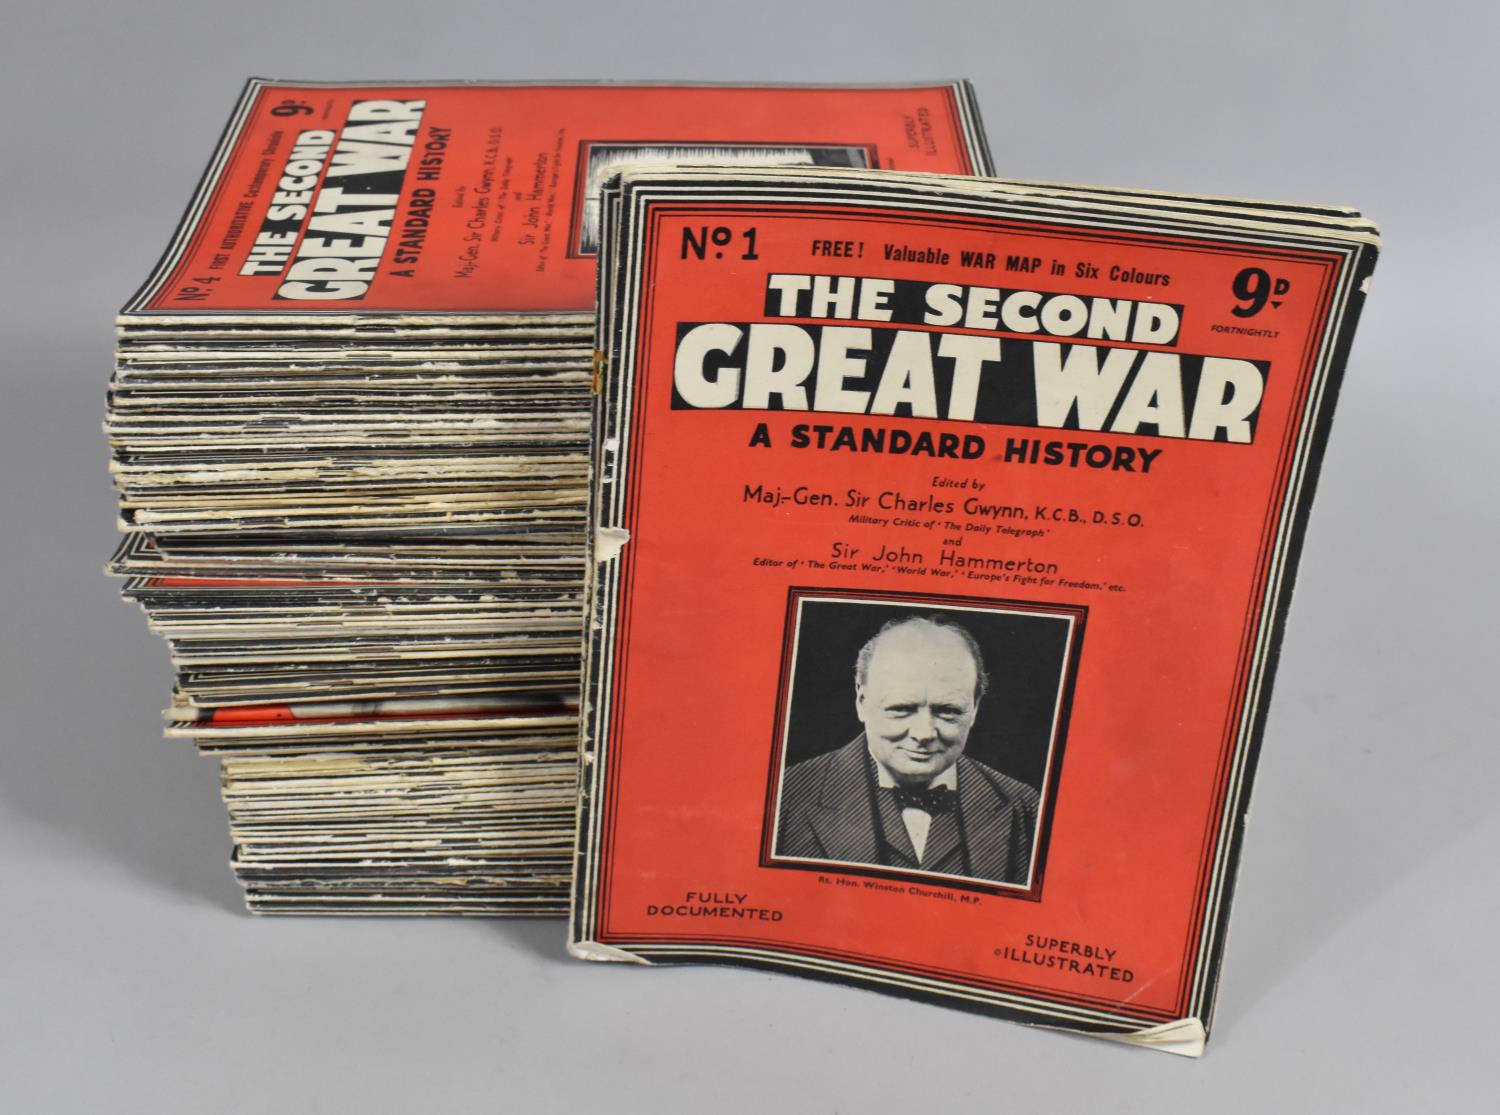 A Set of WWII Magazines, A Standard History of the Second Great War